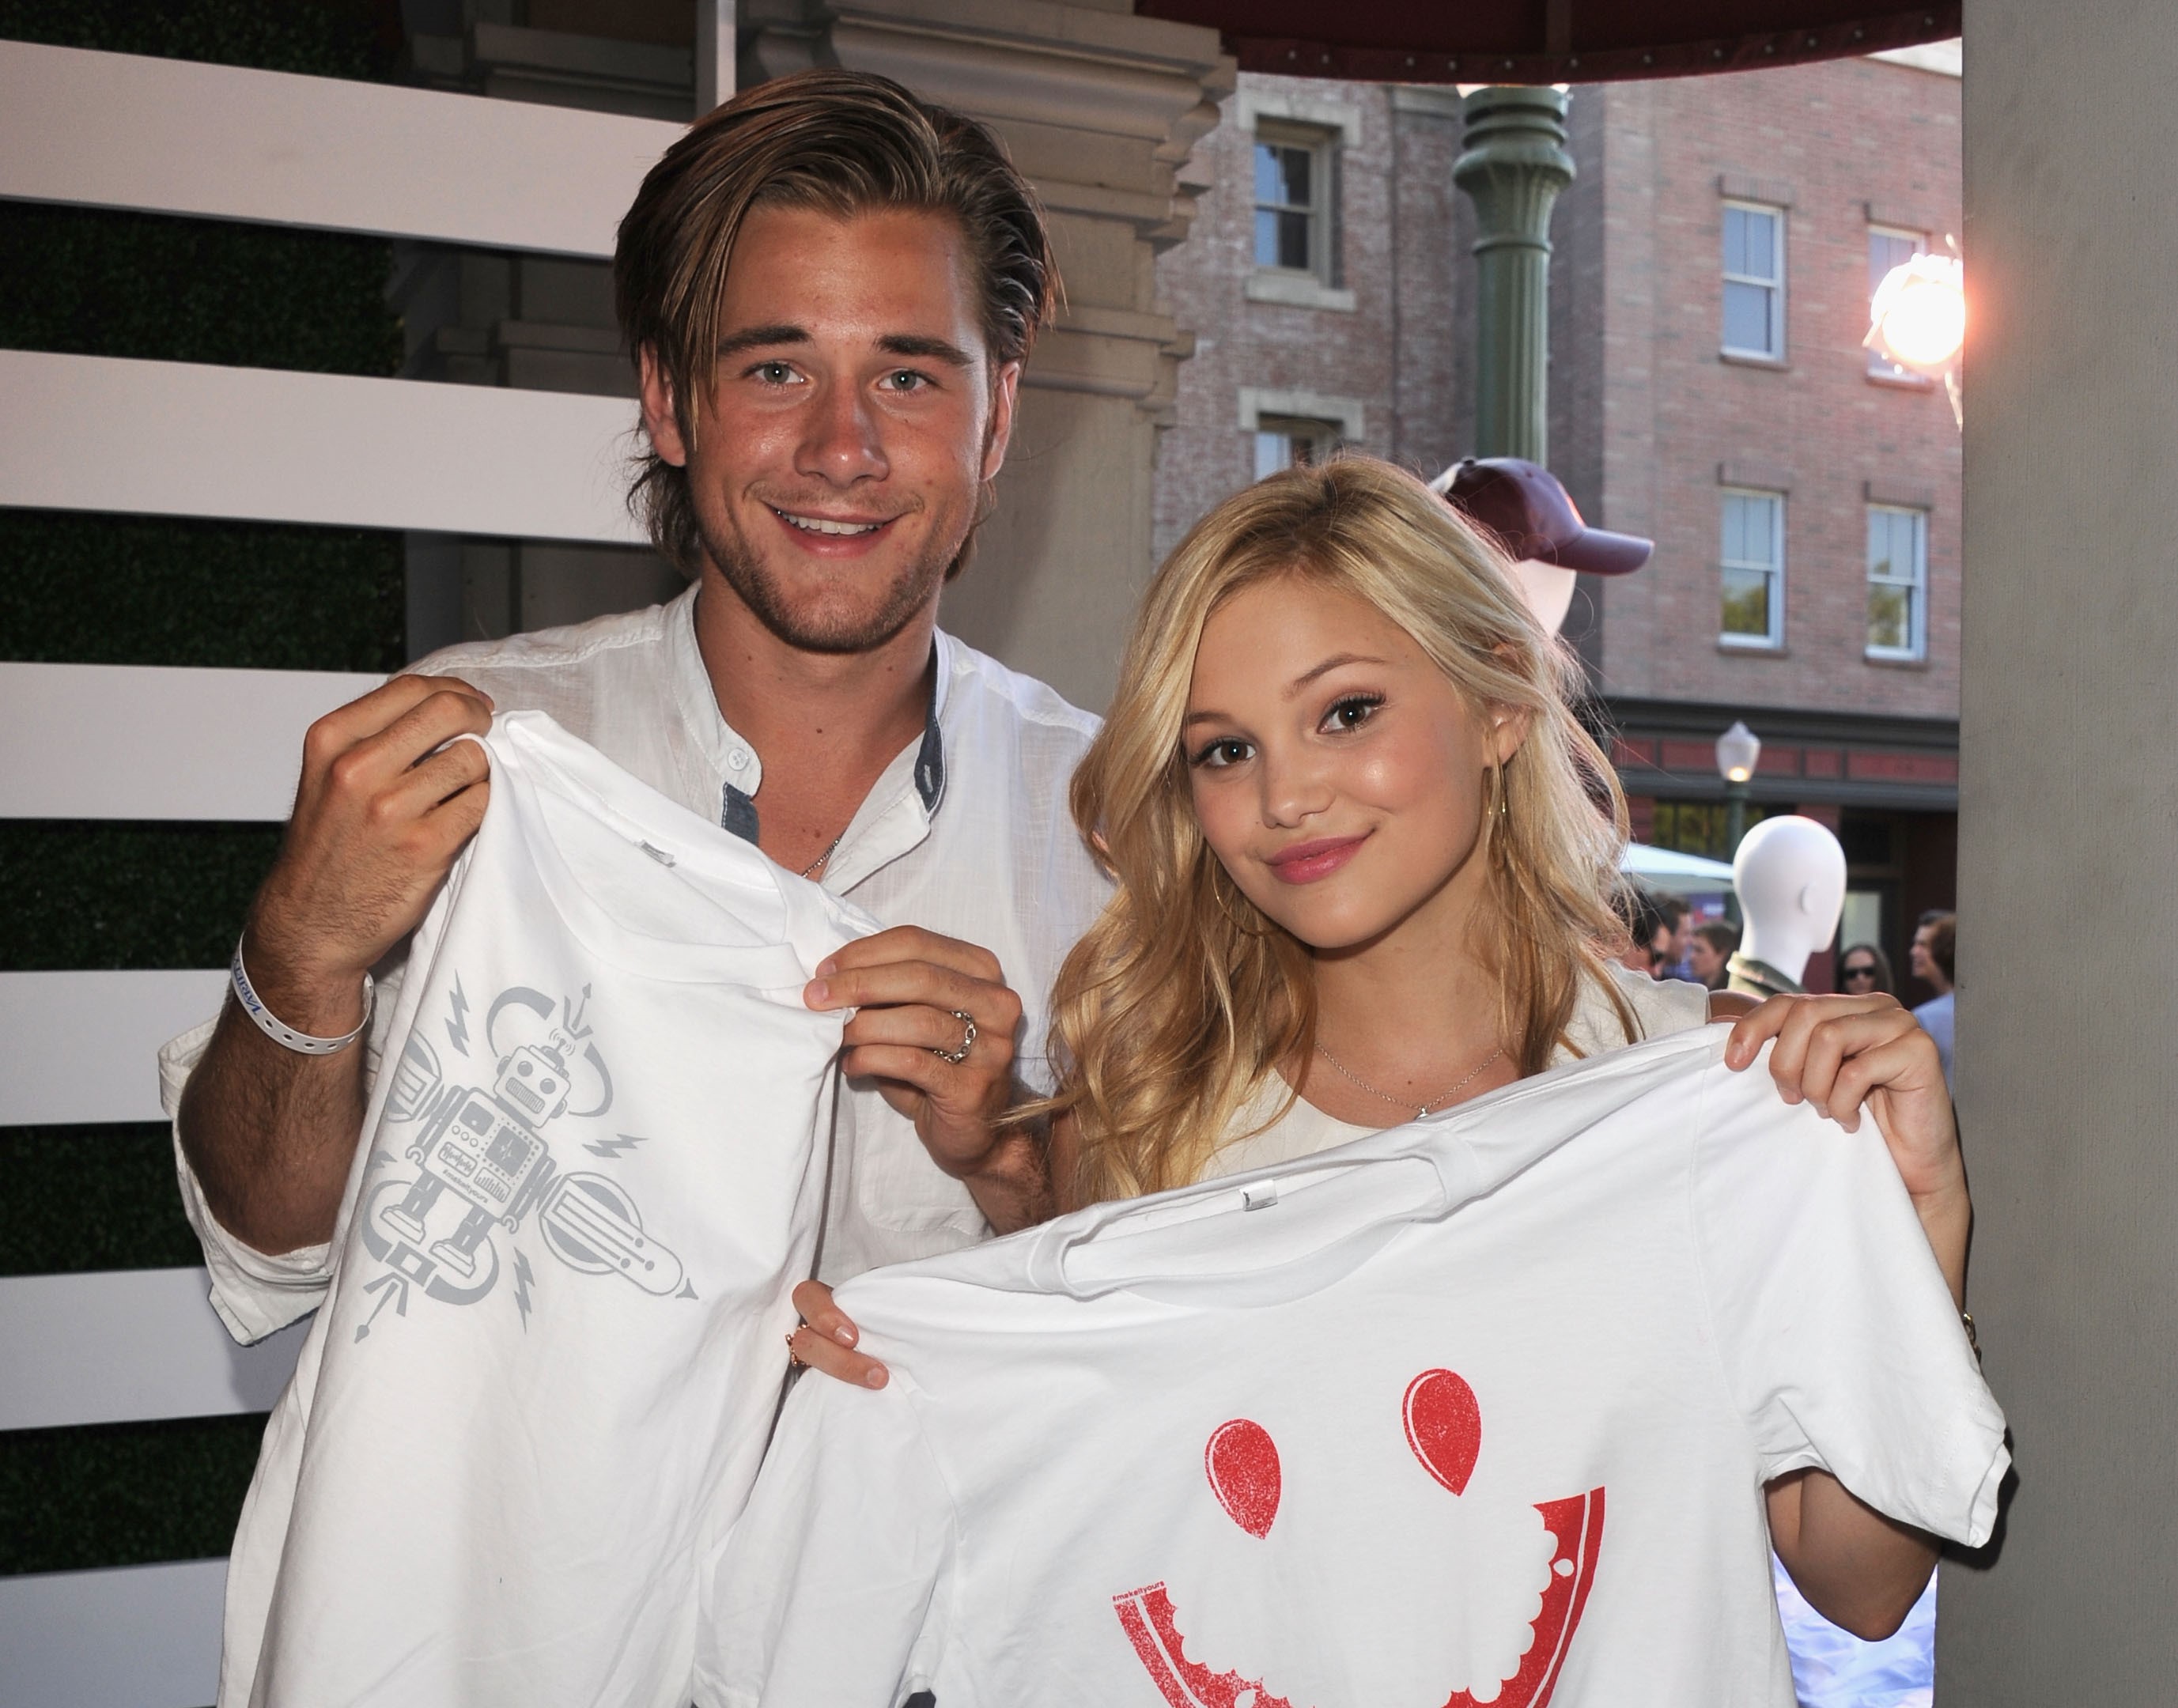 Luke Benward (L) and Olivia Holt attend Variety's Power of Youth at Universal Studios Backlot, on July 27, 2013, in Universal City, California. | Source: Getty Images